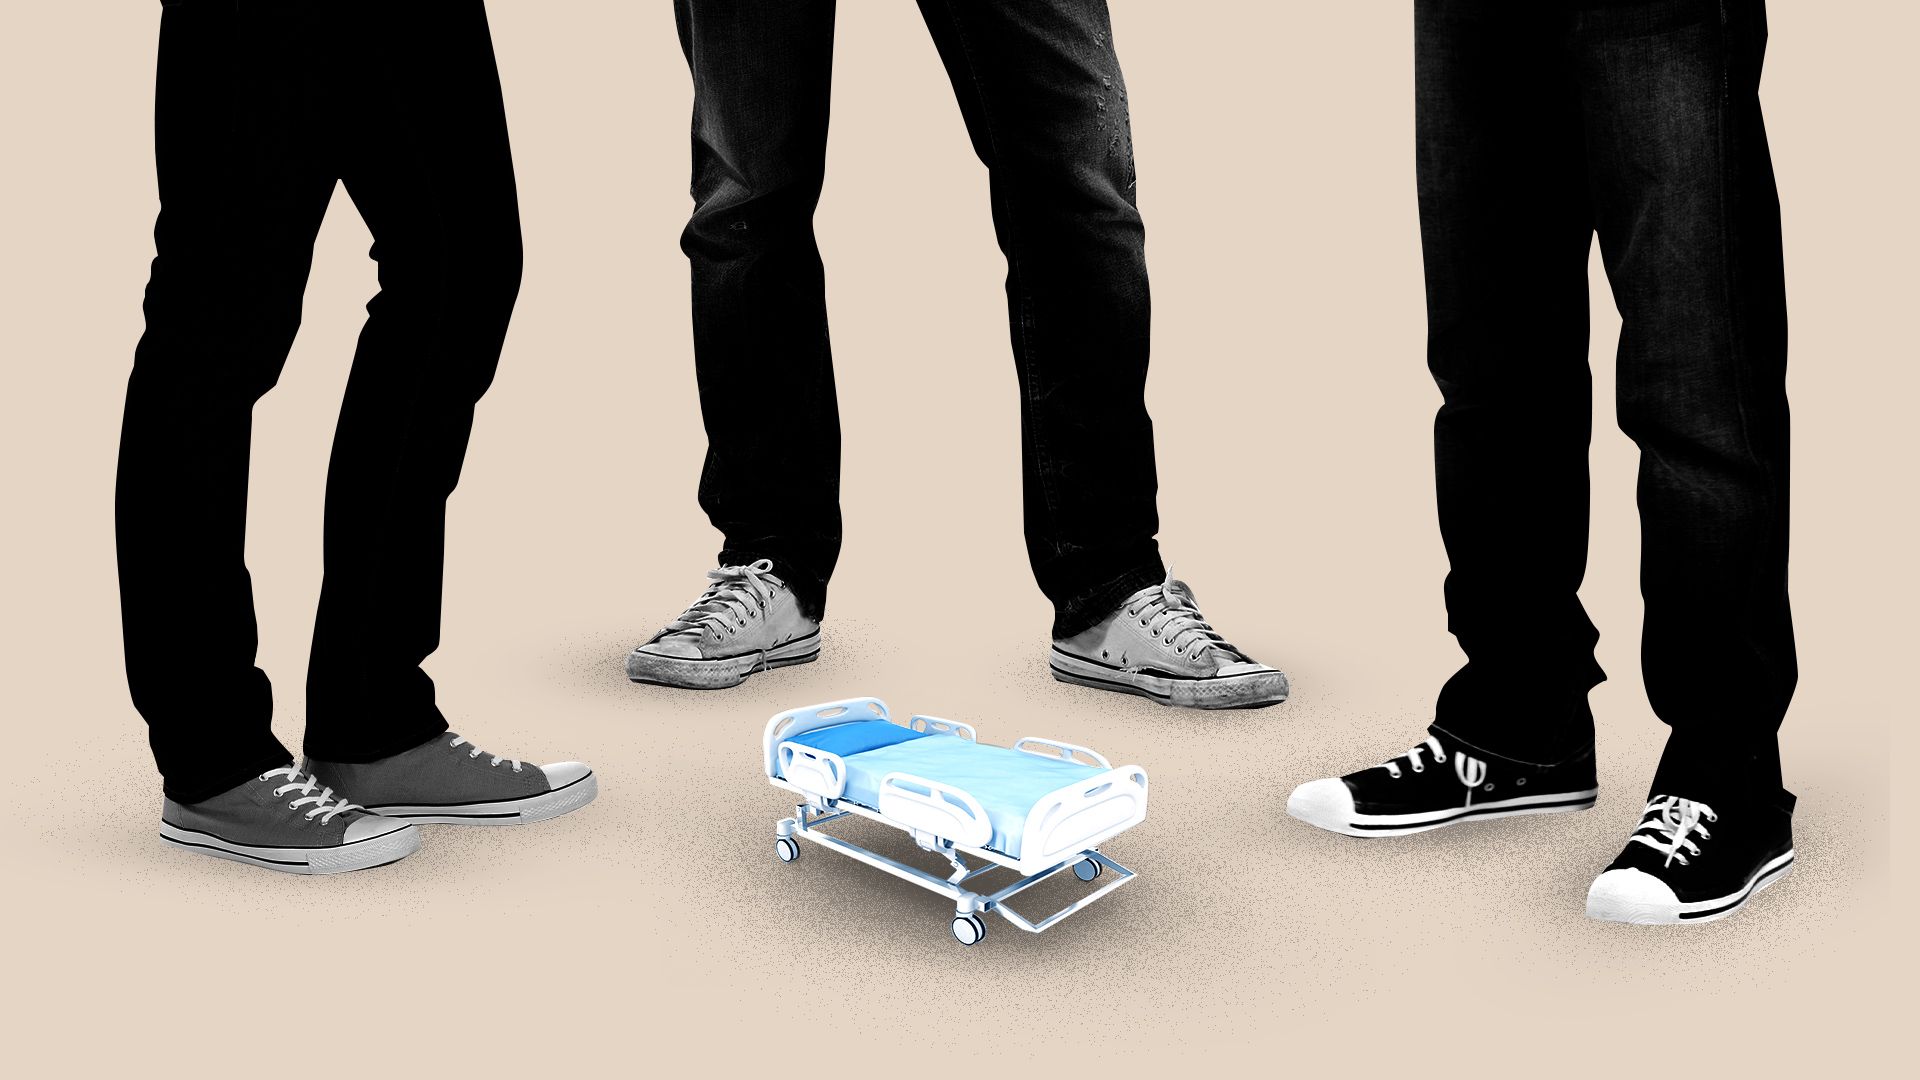 Illustration of giant legs standing around a small hospital bed. 